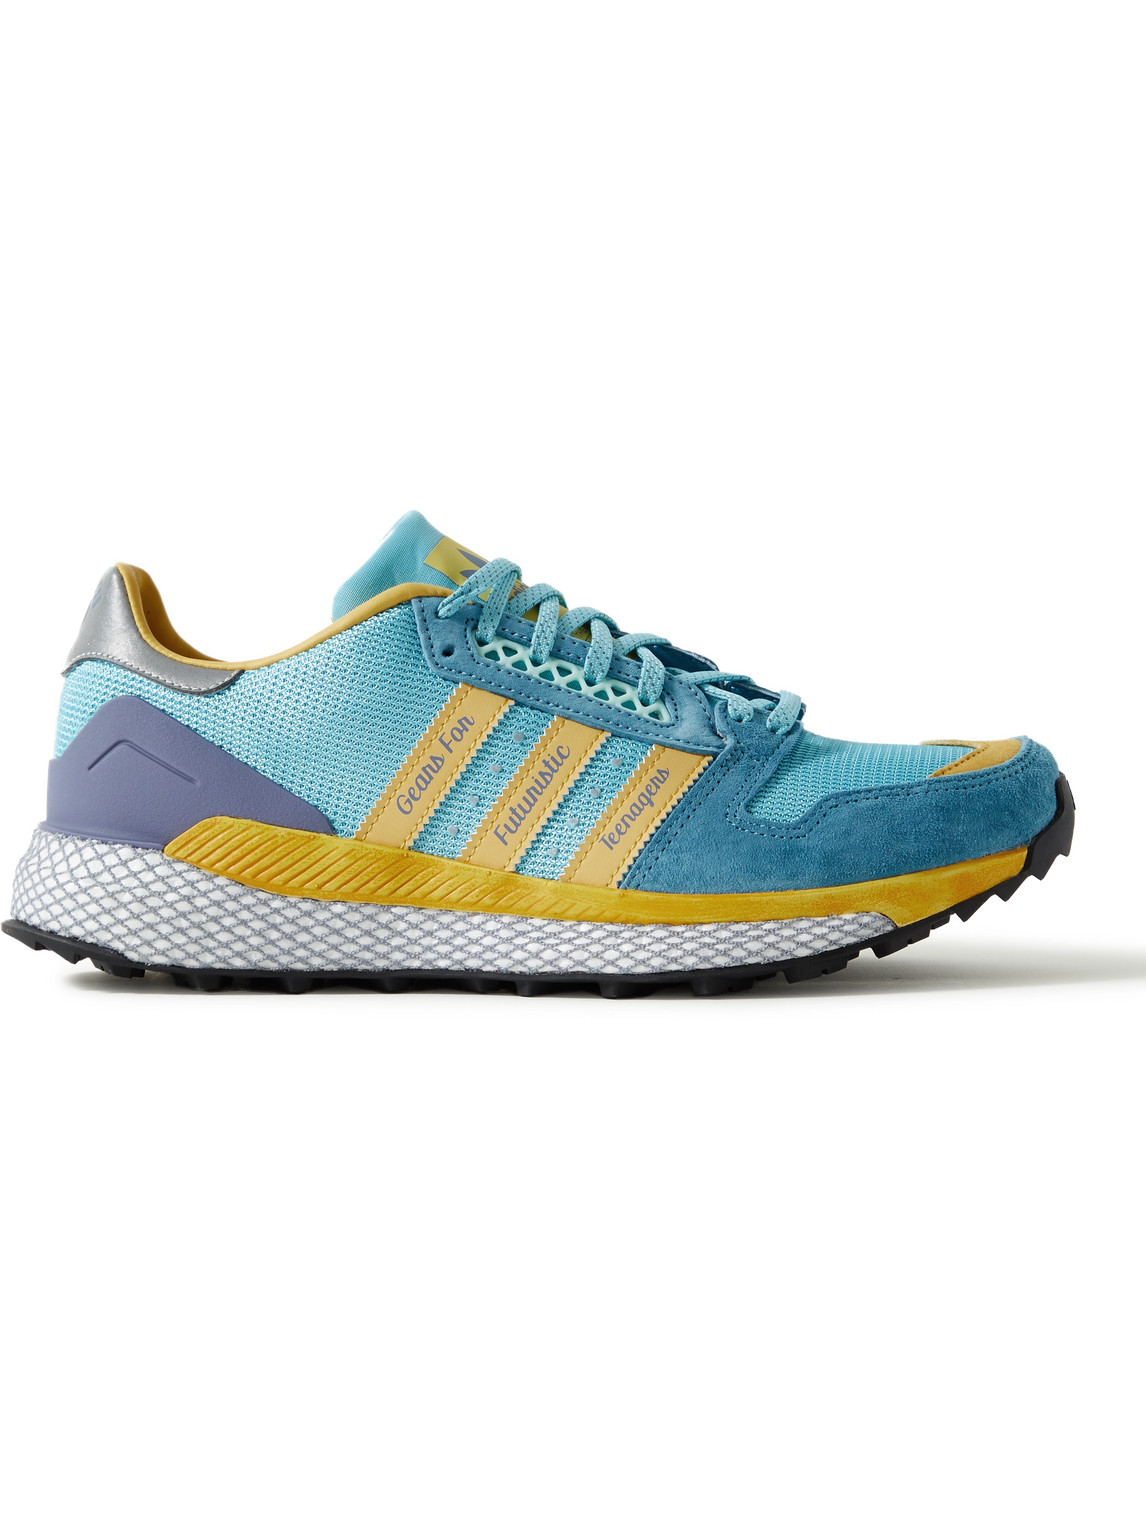 Adidas Consortium Human Made Questar Suede And Mesh Sneakers In Blue